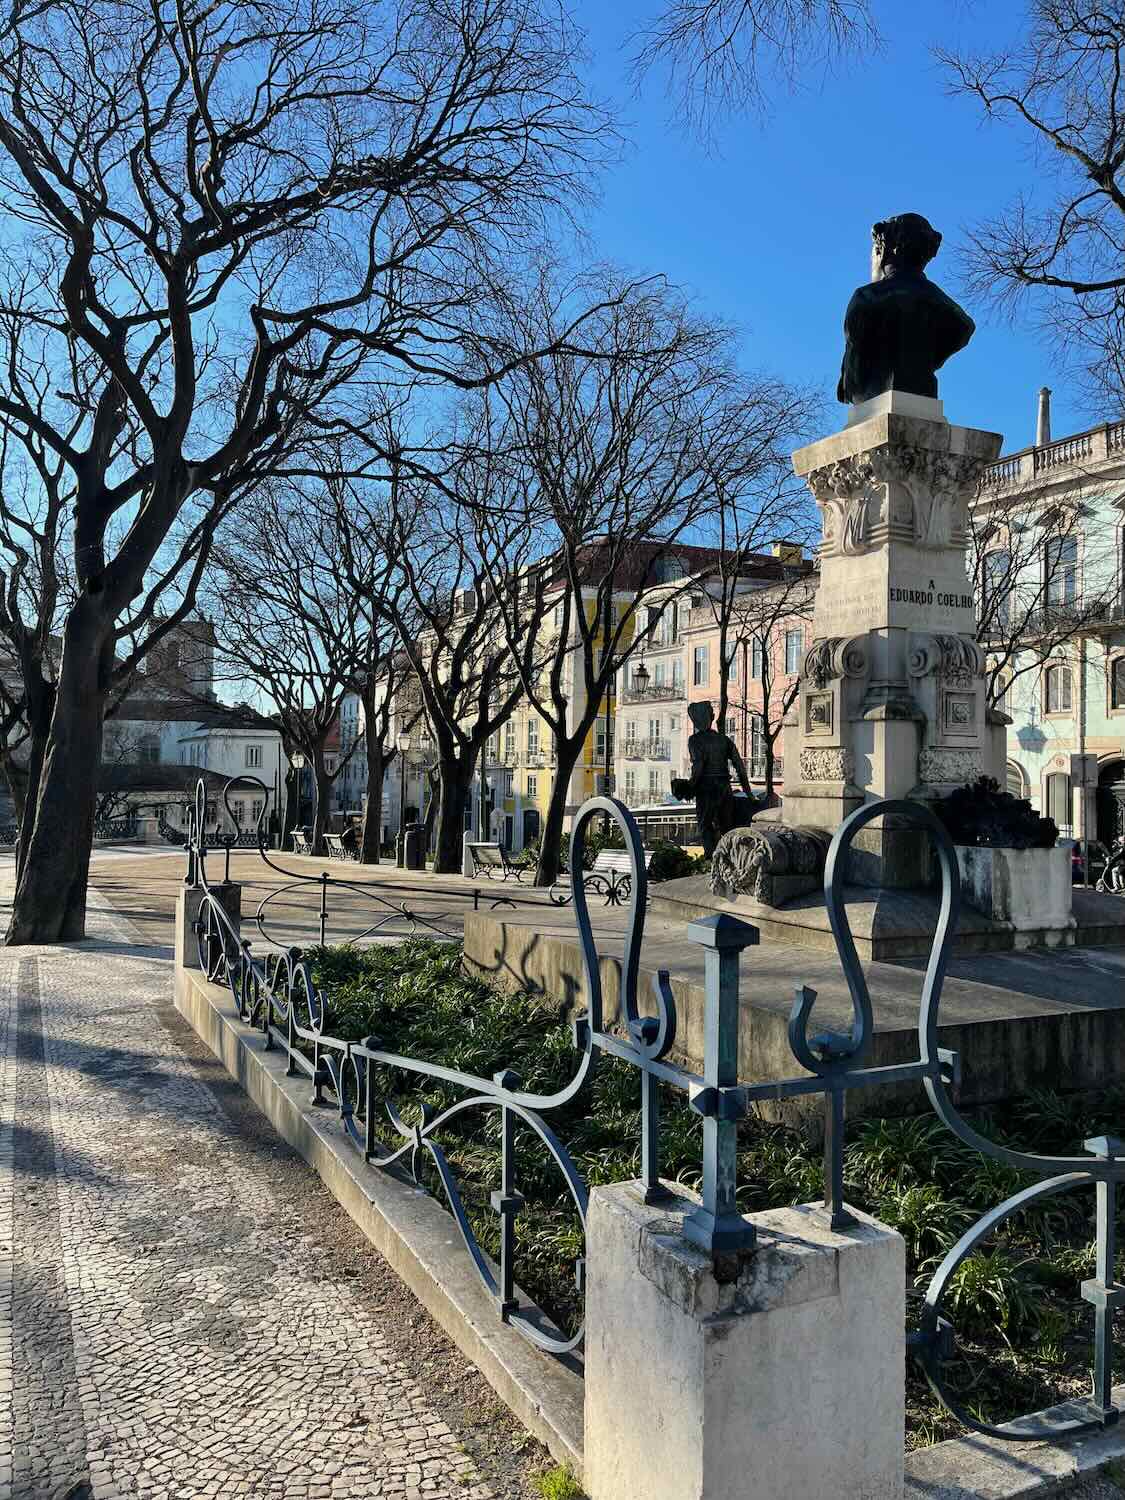 A serene Lisbon neighborhood in the daytime with bare trees, iron-wrought fences, and a statue, showcasing the calm residential side of the city.